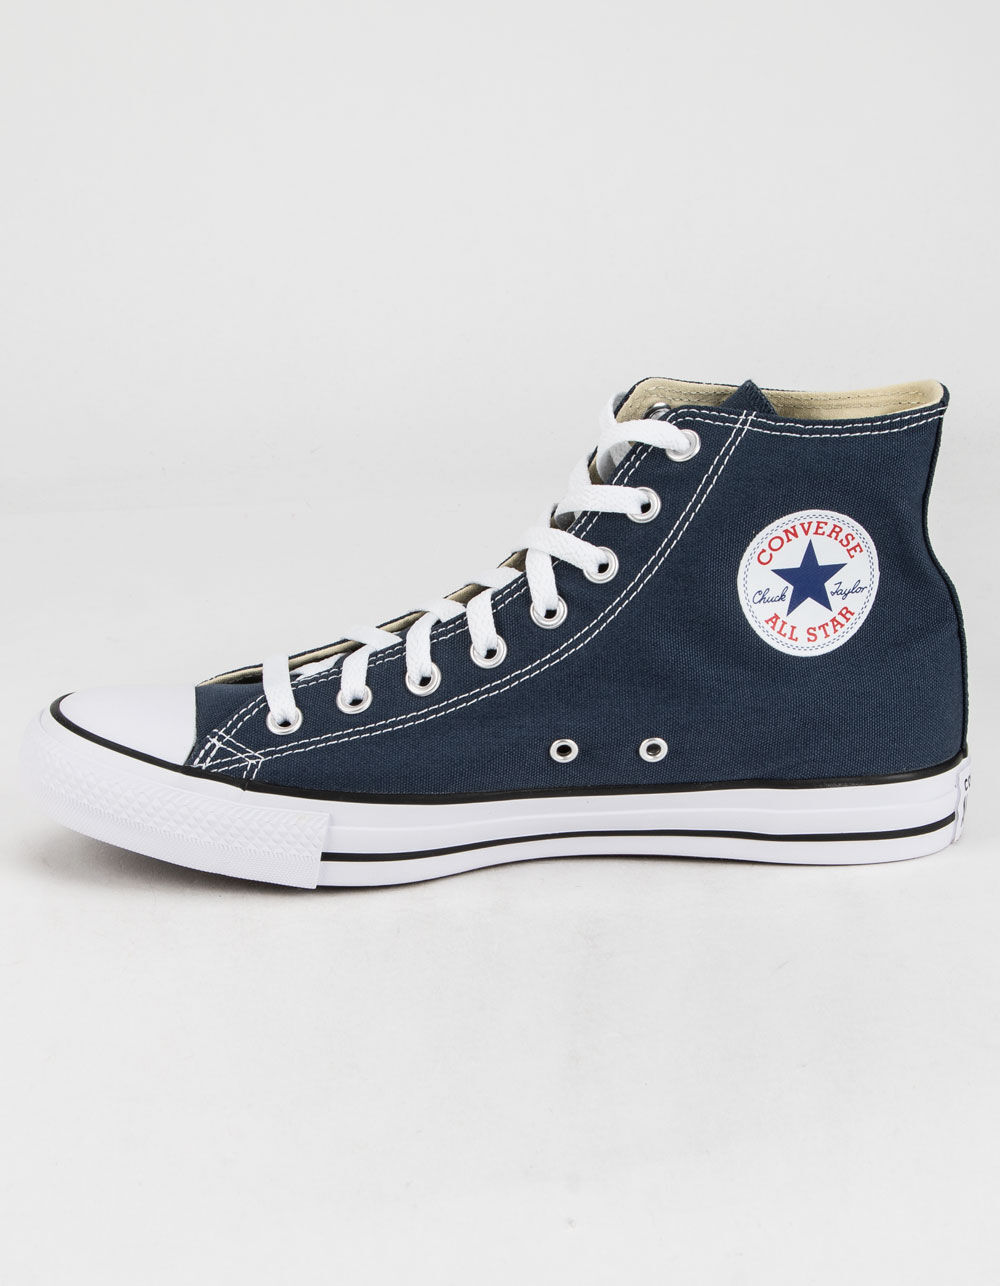 dato finger trist CONVERSE Chuck Taylor All Star Navy High Top Shoes - NAVY | Tillys